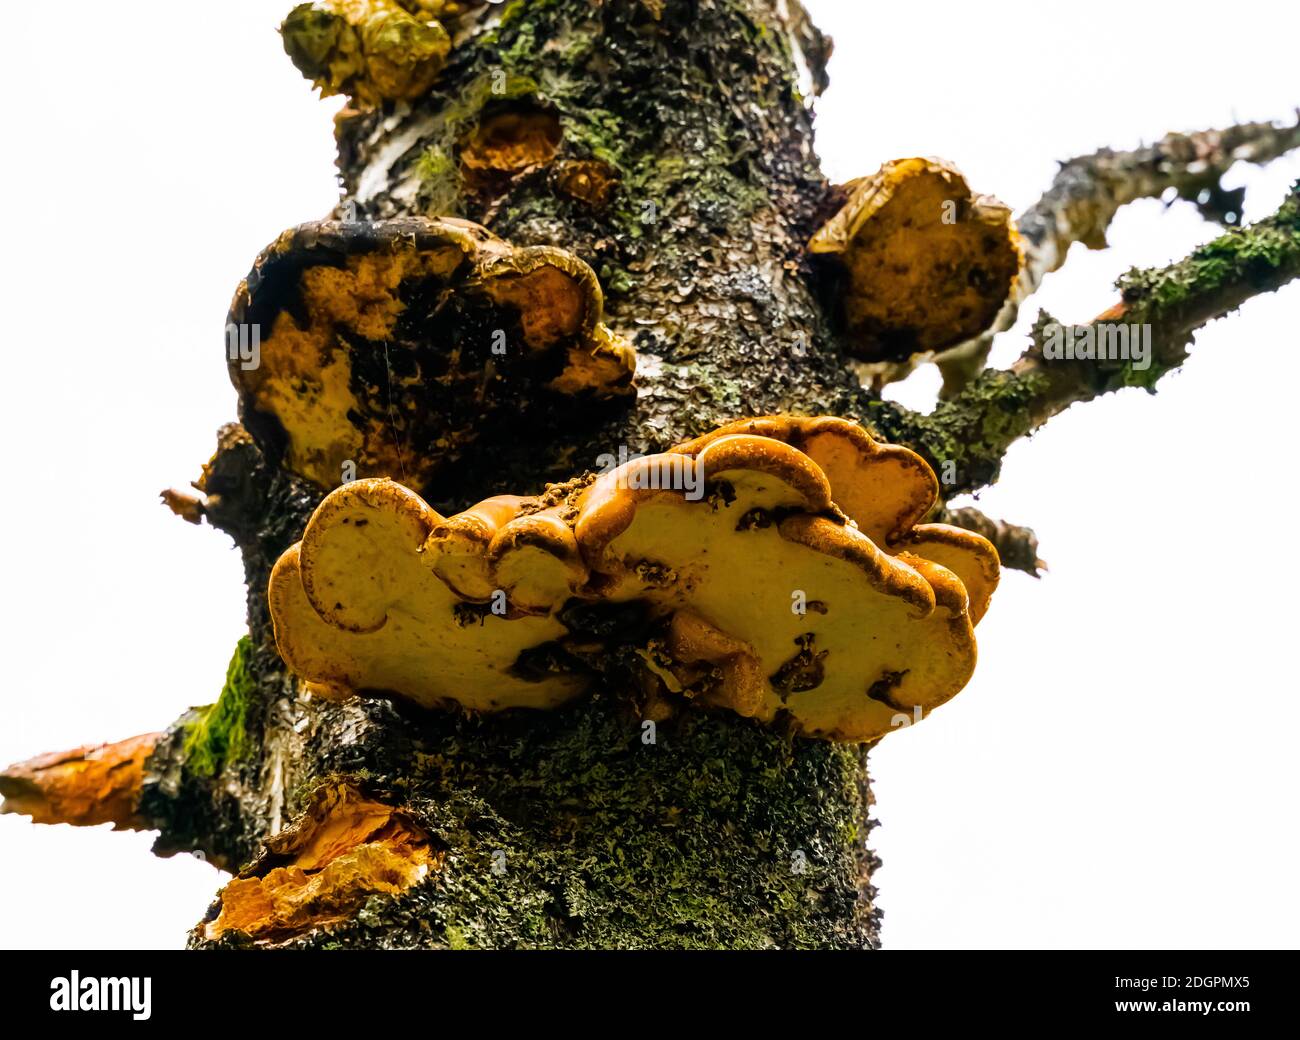 Yellow and orange oyster mushrooms growing on an old dead tree.  Stock Photo